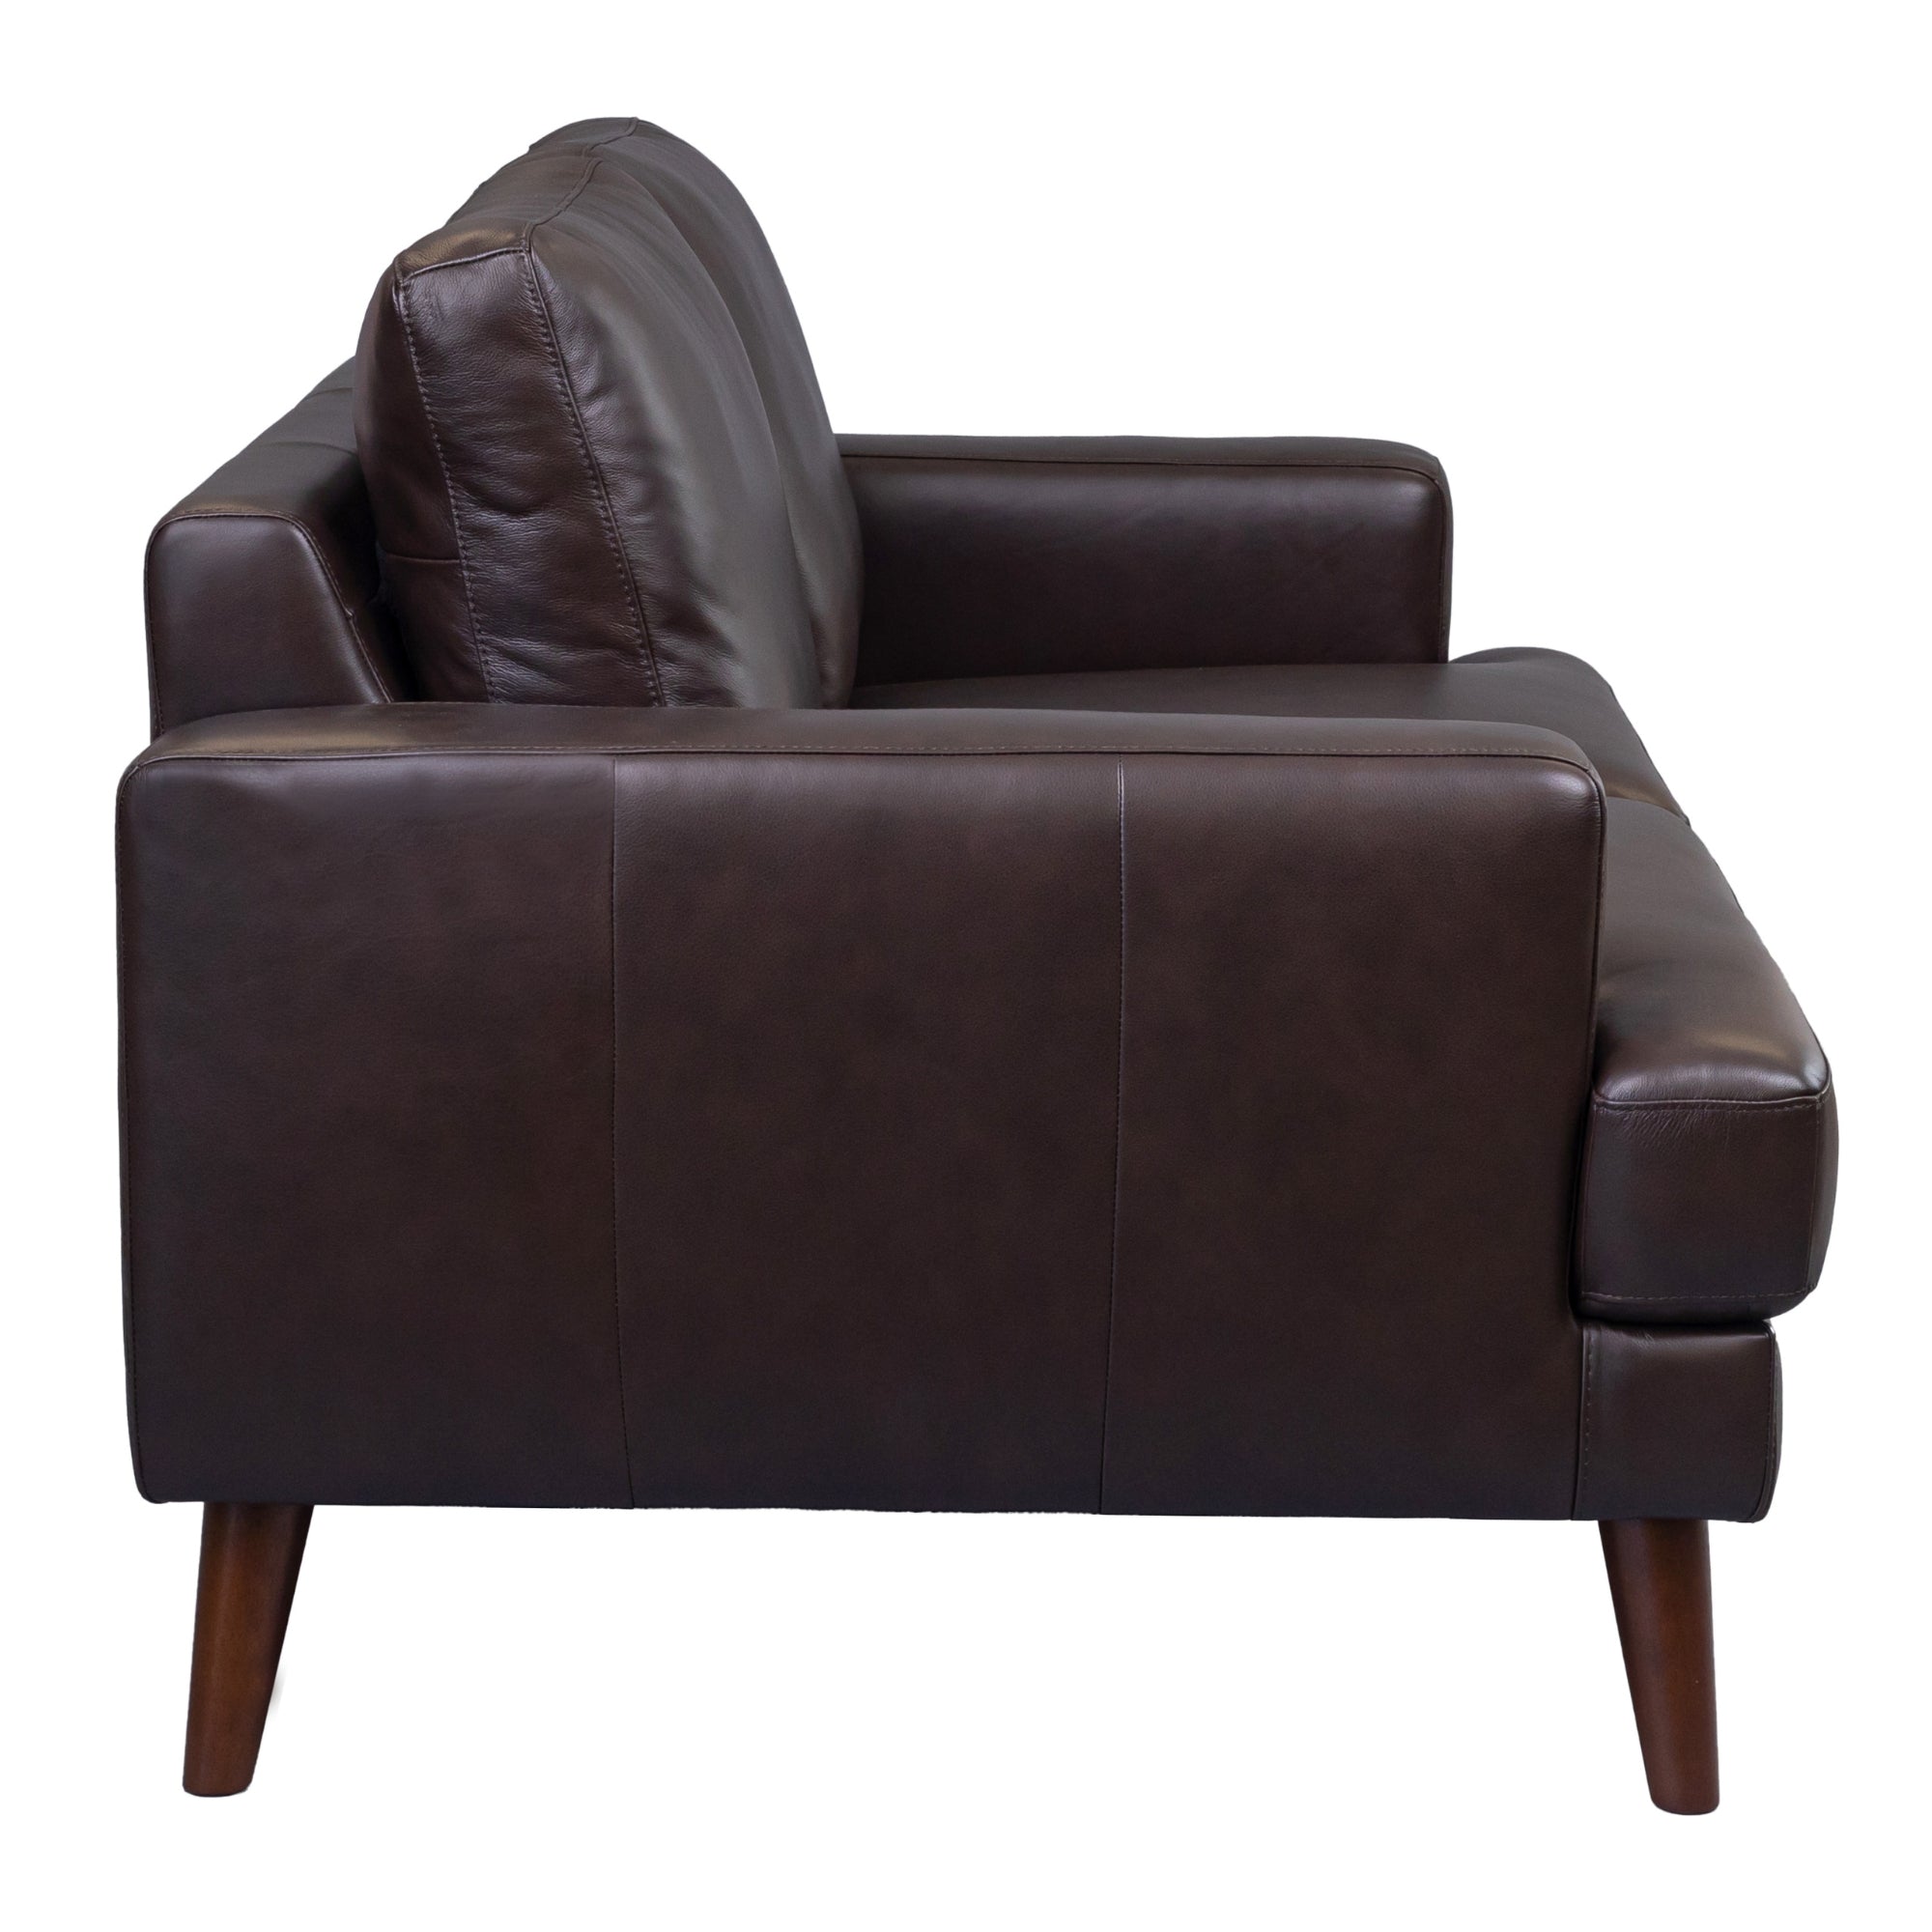 Modern Chocolate Leather 3+2 Seater Sofa Set with Rubberwood Legs